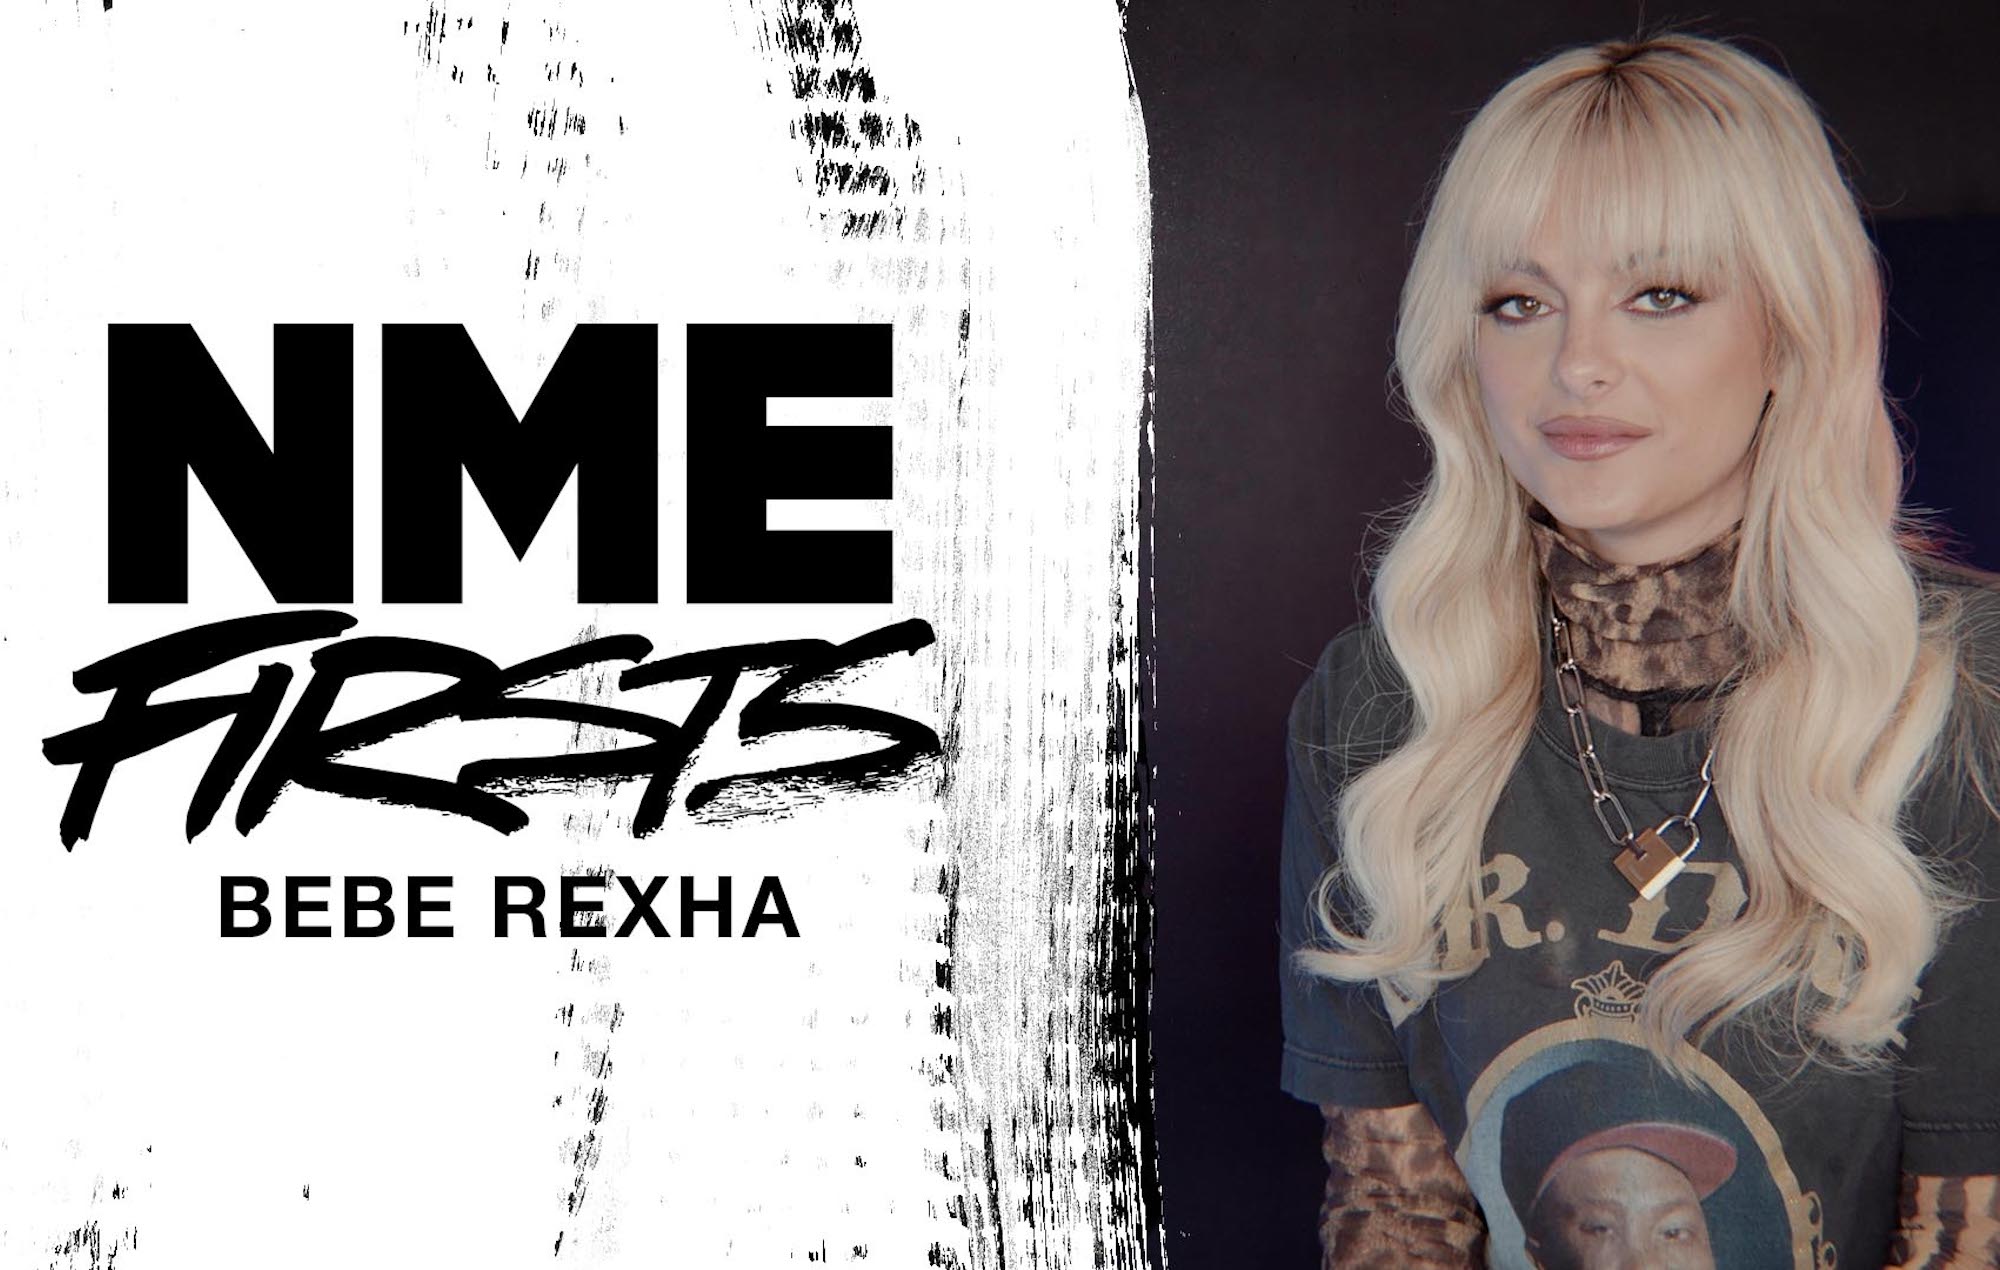 Bebe Rexha talks NME through her ‘Firsts’